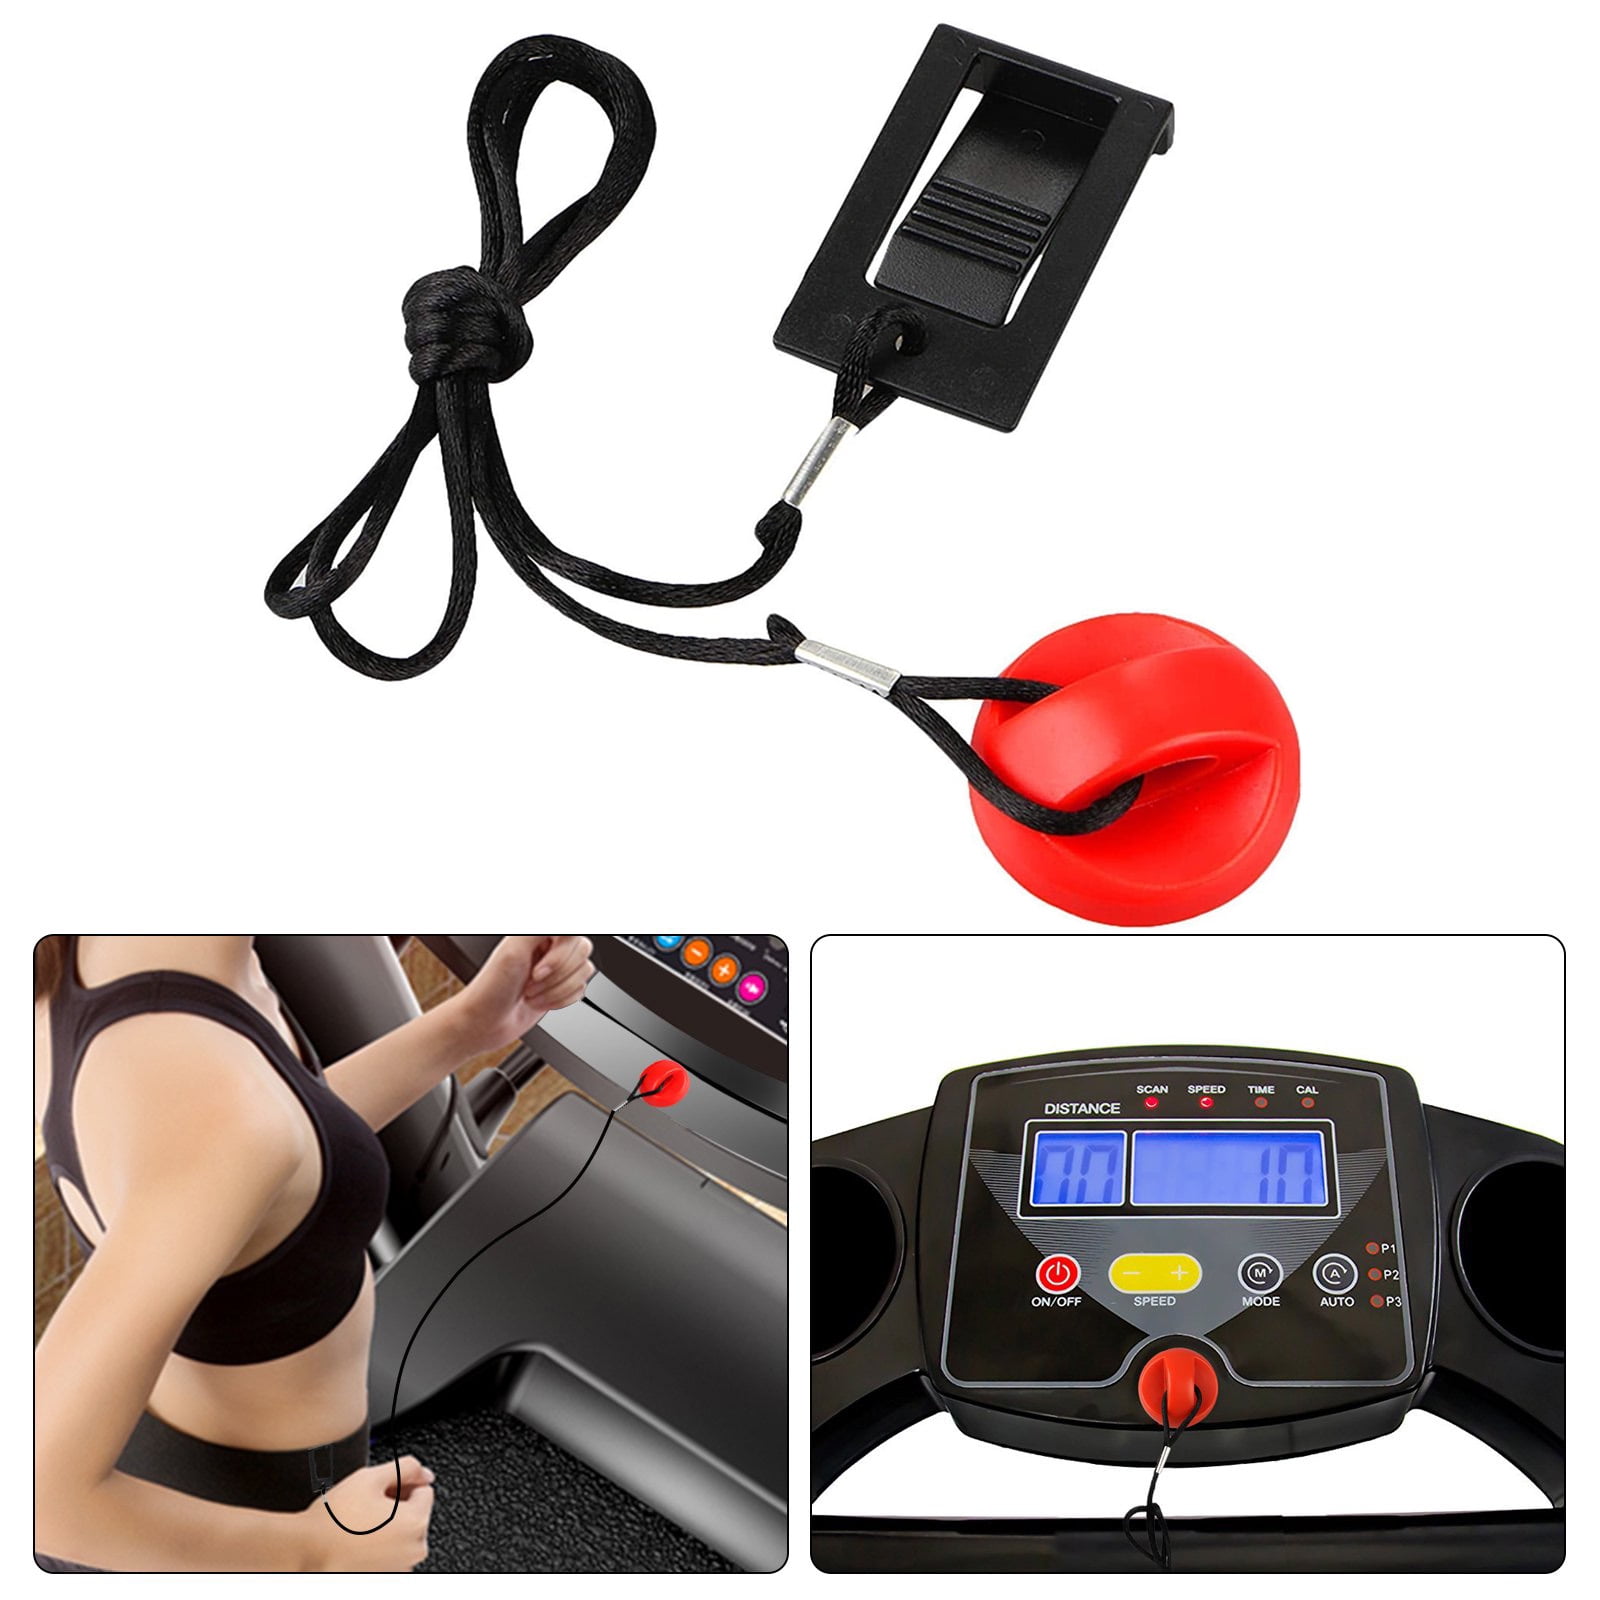 Running Machine Safety Key Treadmill Magnetic Security Switch Lock Fitness 、FY 